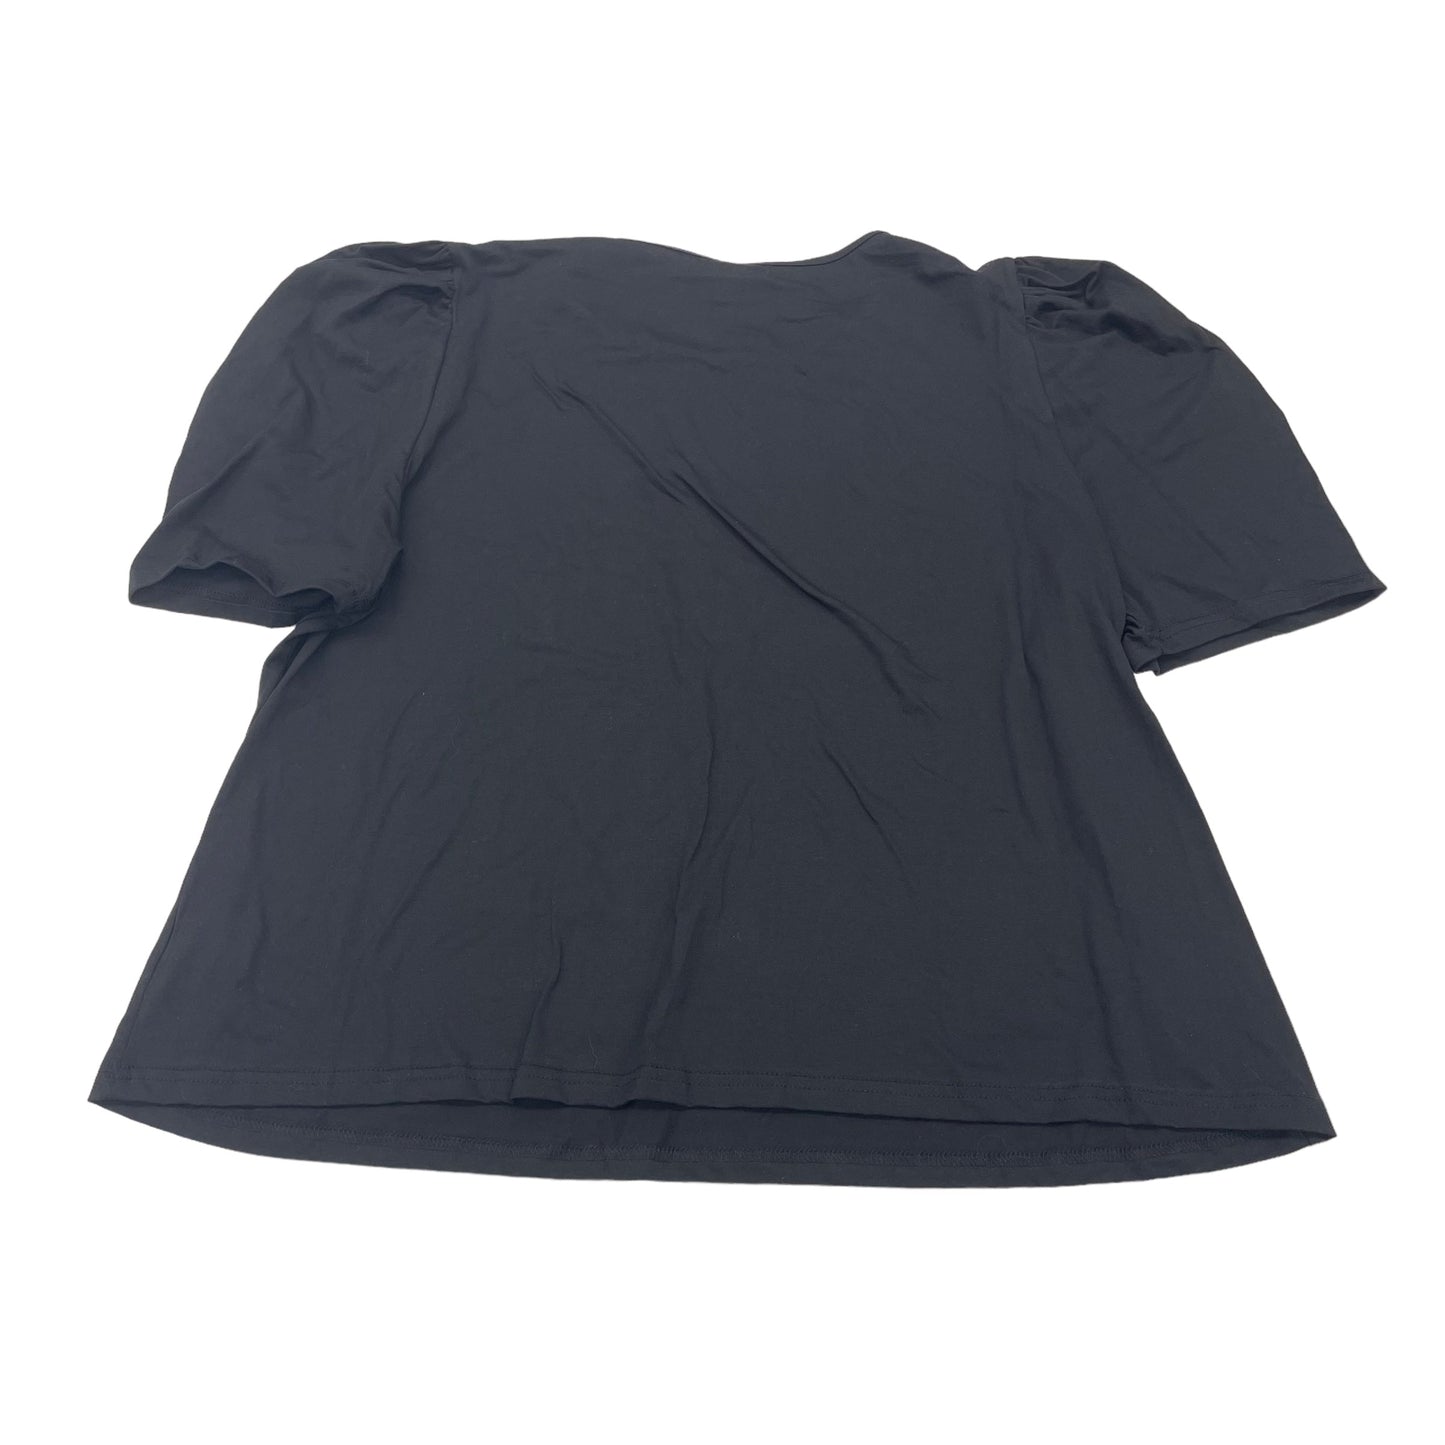 Top Short Sleeve By Clothes Mentor  Size: 4x